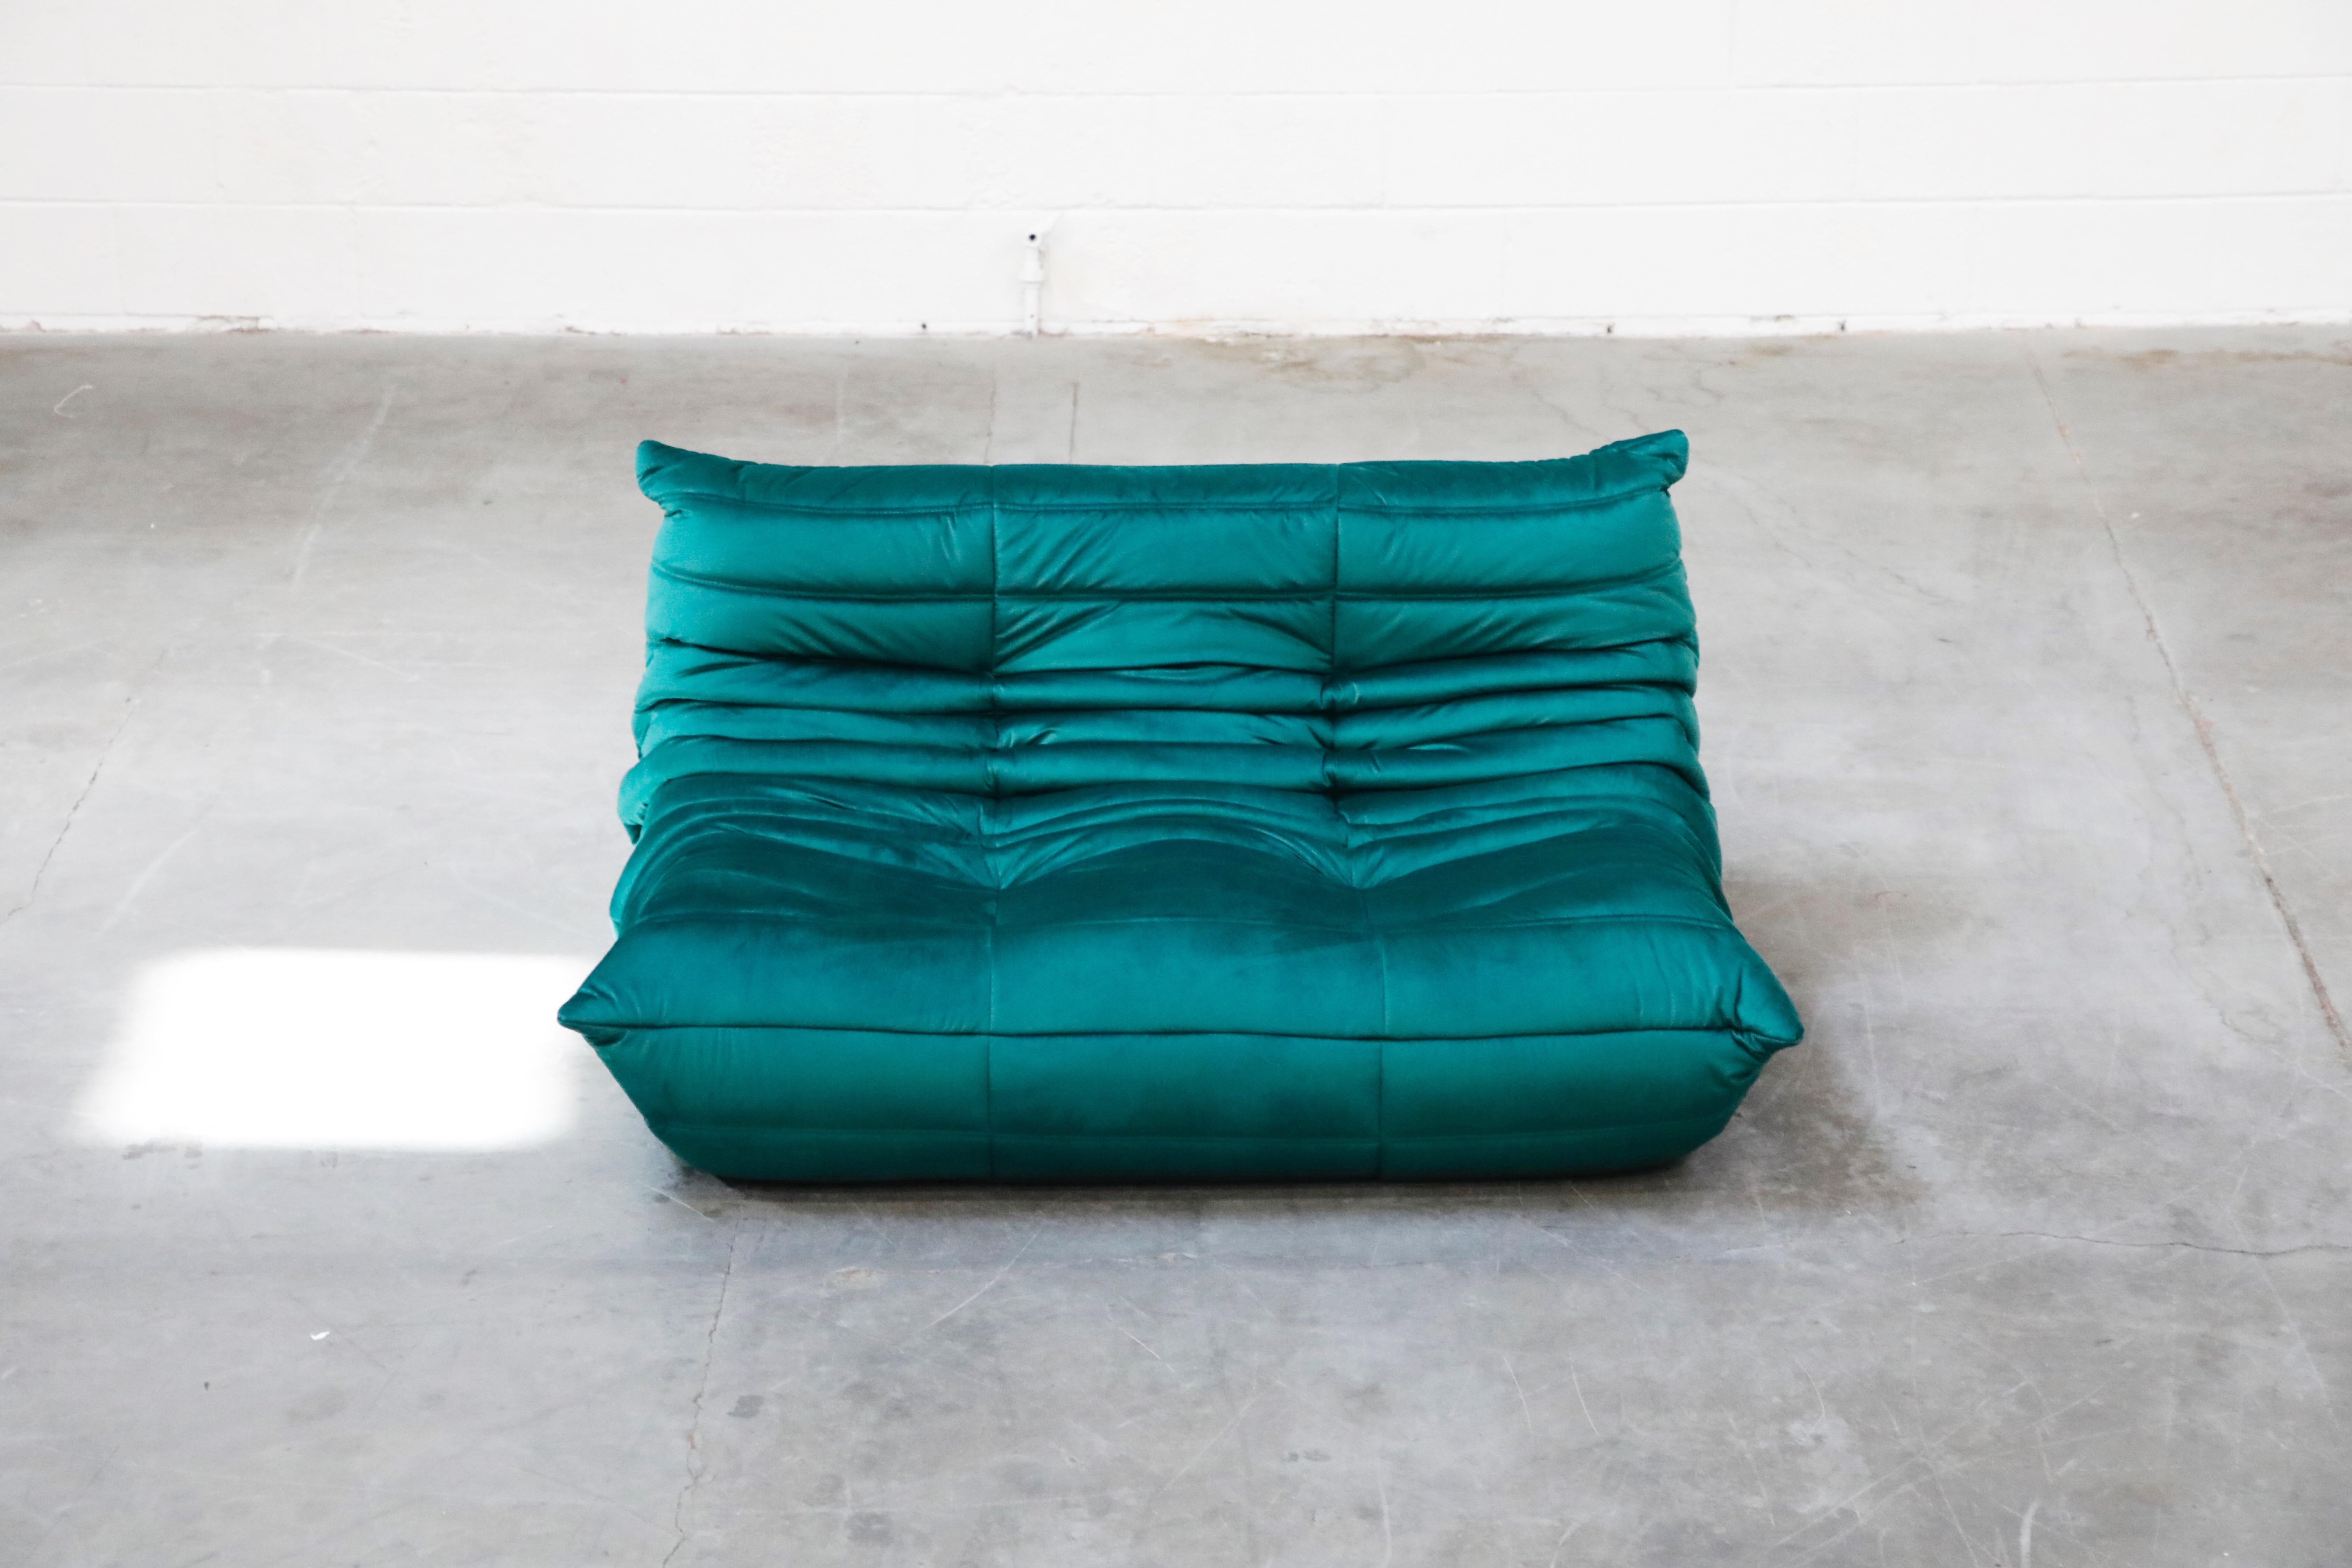 This incredible 'Togo' two-seat loveseat was designed by Michel Ducaroy in 1973 for Ligne Roset, France. This Togo loveseat sofa was completely restored with new high grade velvet upholstery in a mesmerizing Emerald Green color, and bottom decking